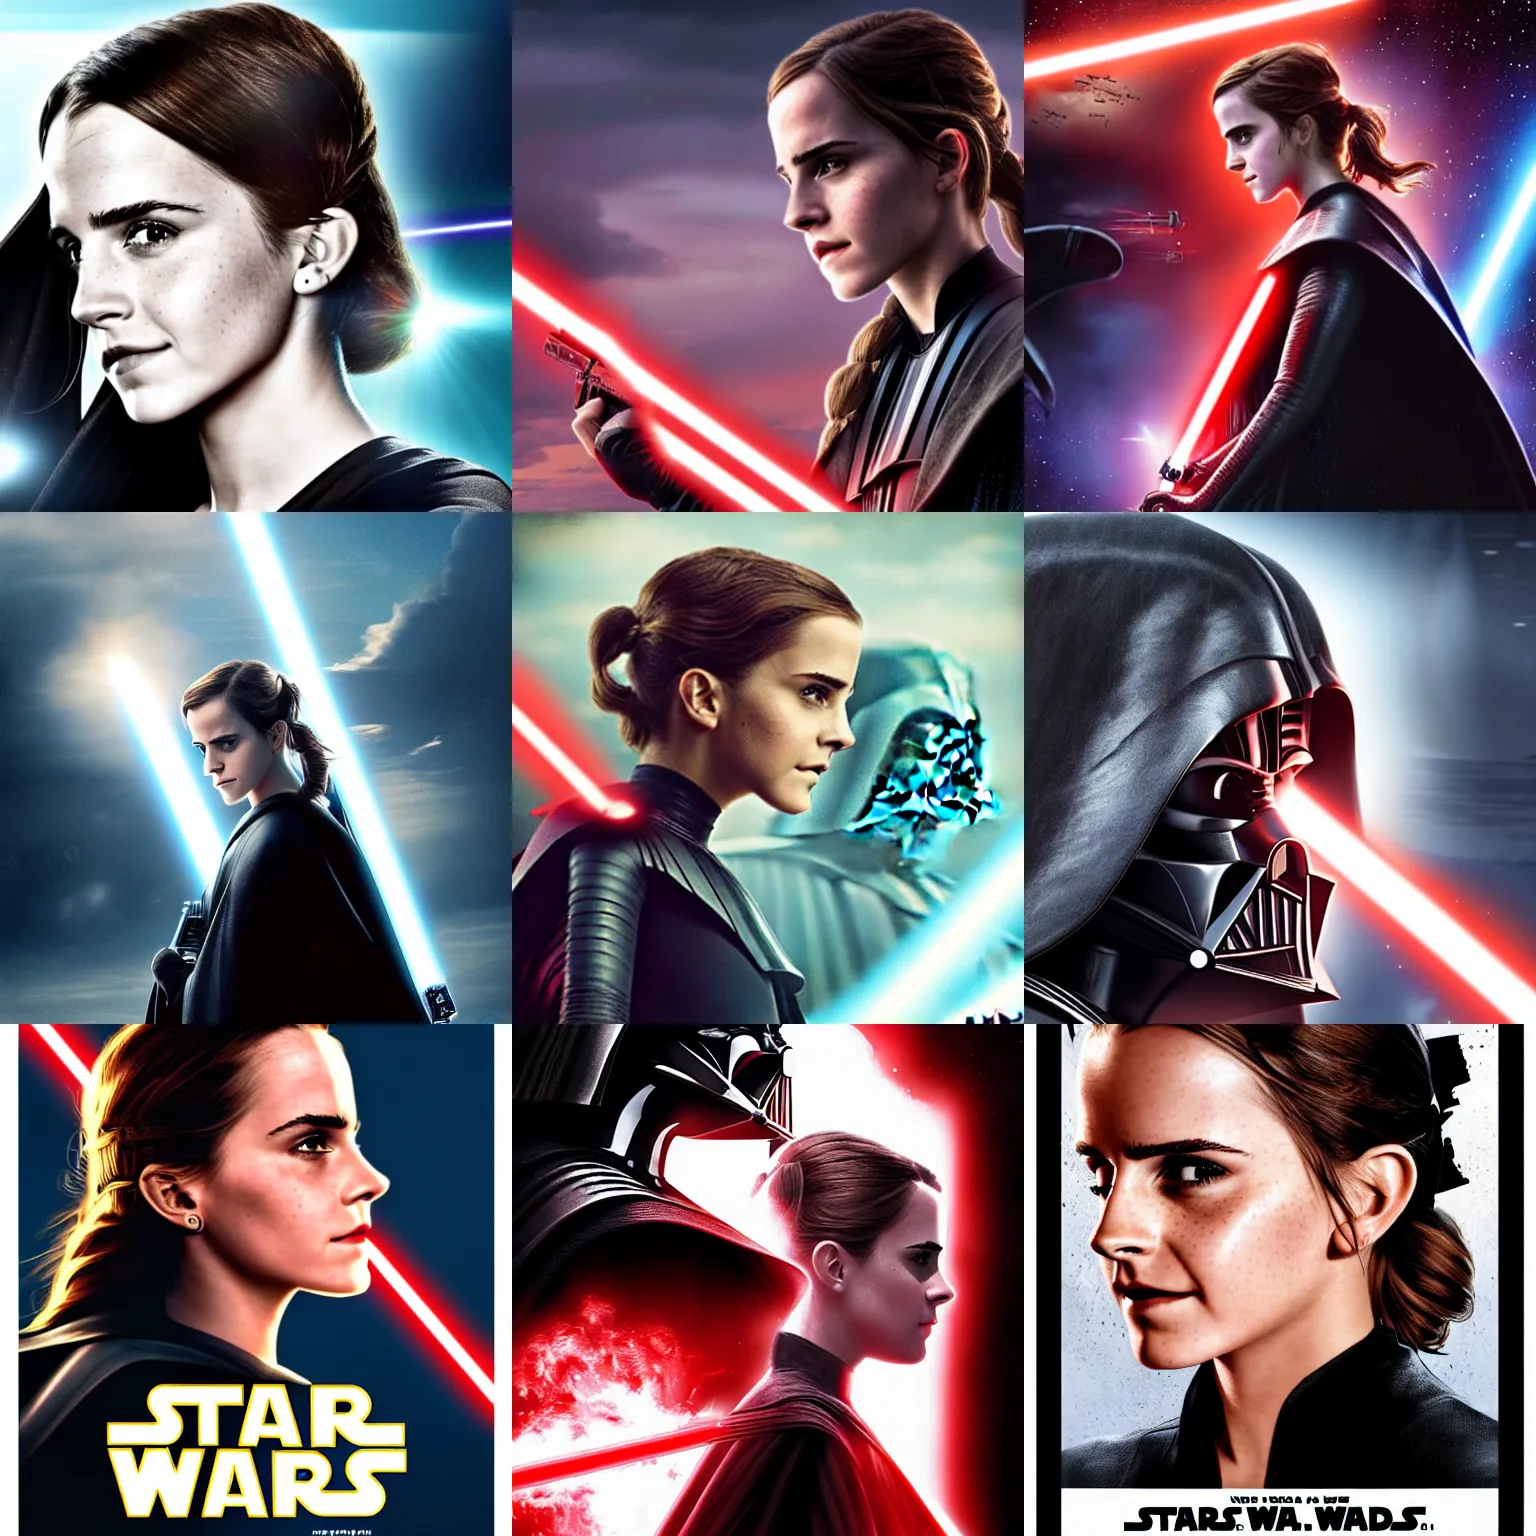 Prompt: side view of emma watson facing darth vader, star wars movie poster